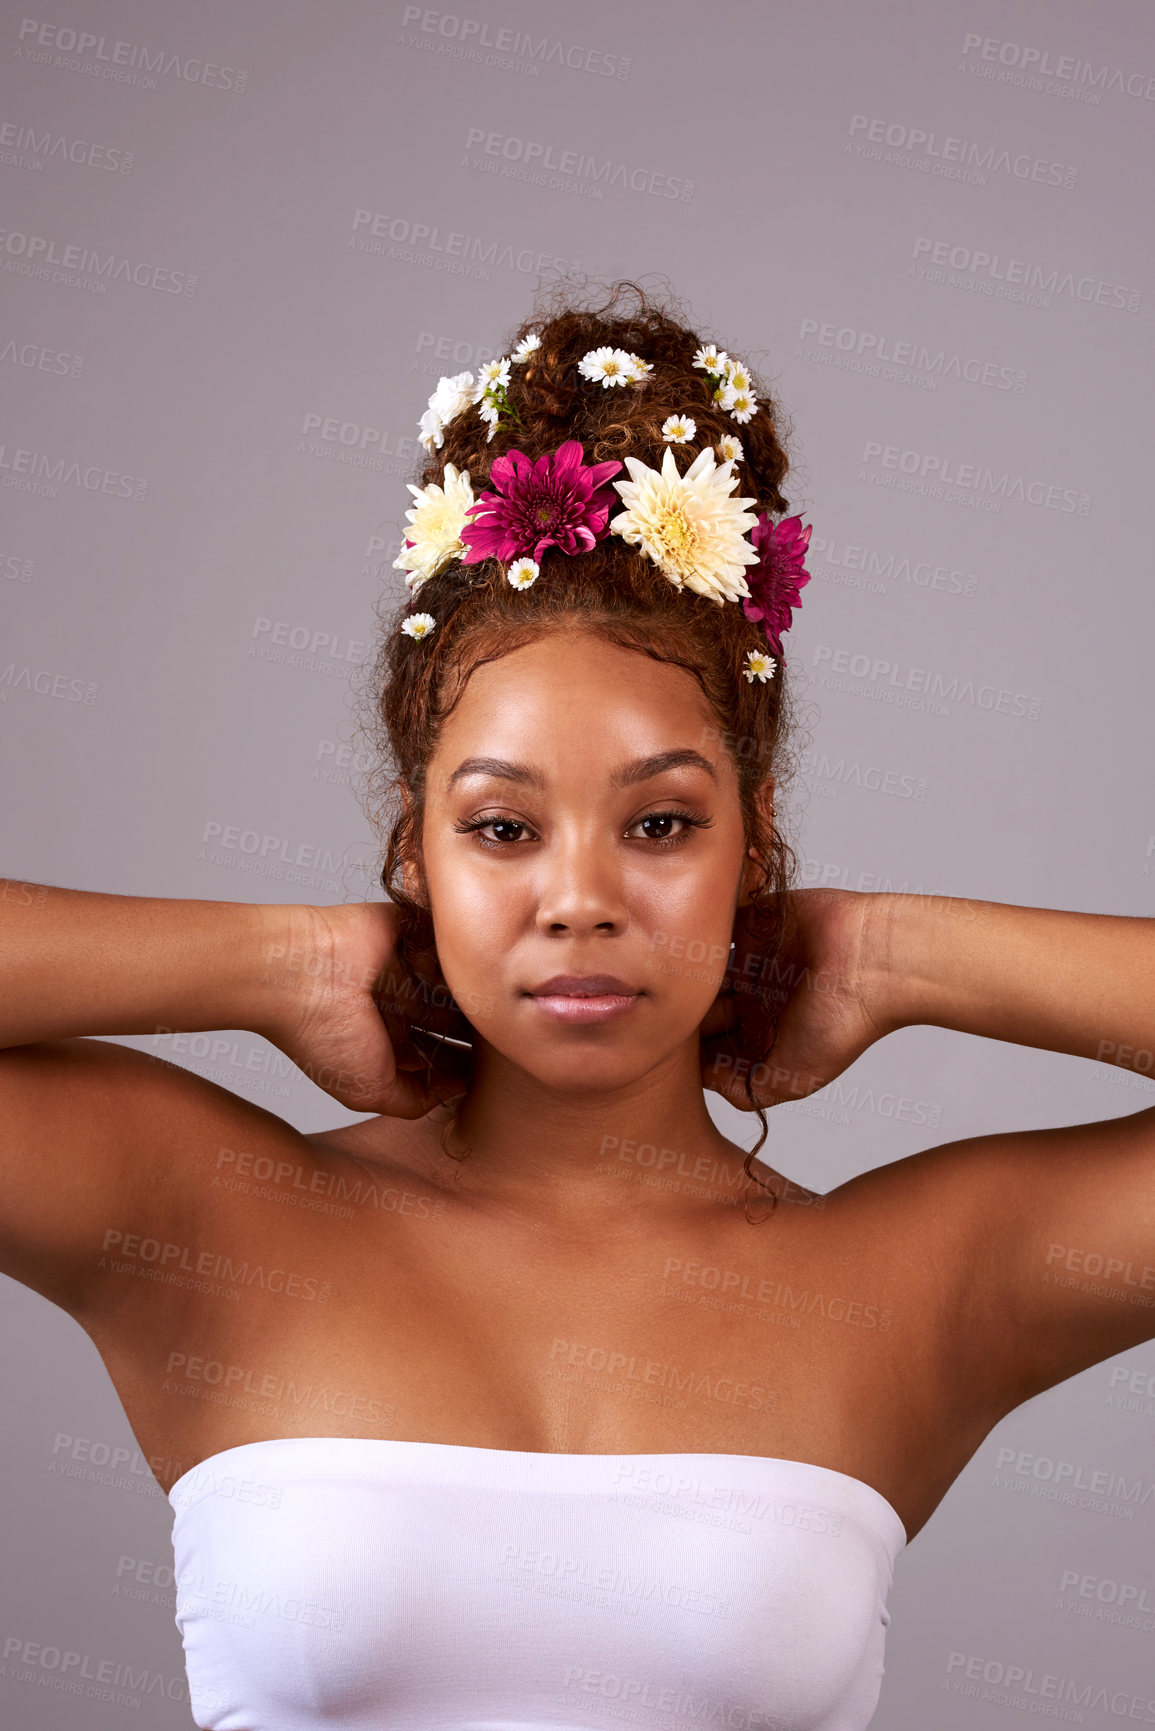 Buy stock photo Studio shot of a beautiful young woman with flowers in her hair against a gray background